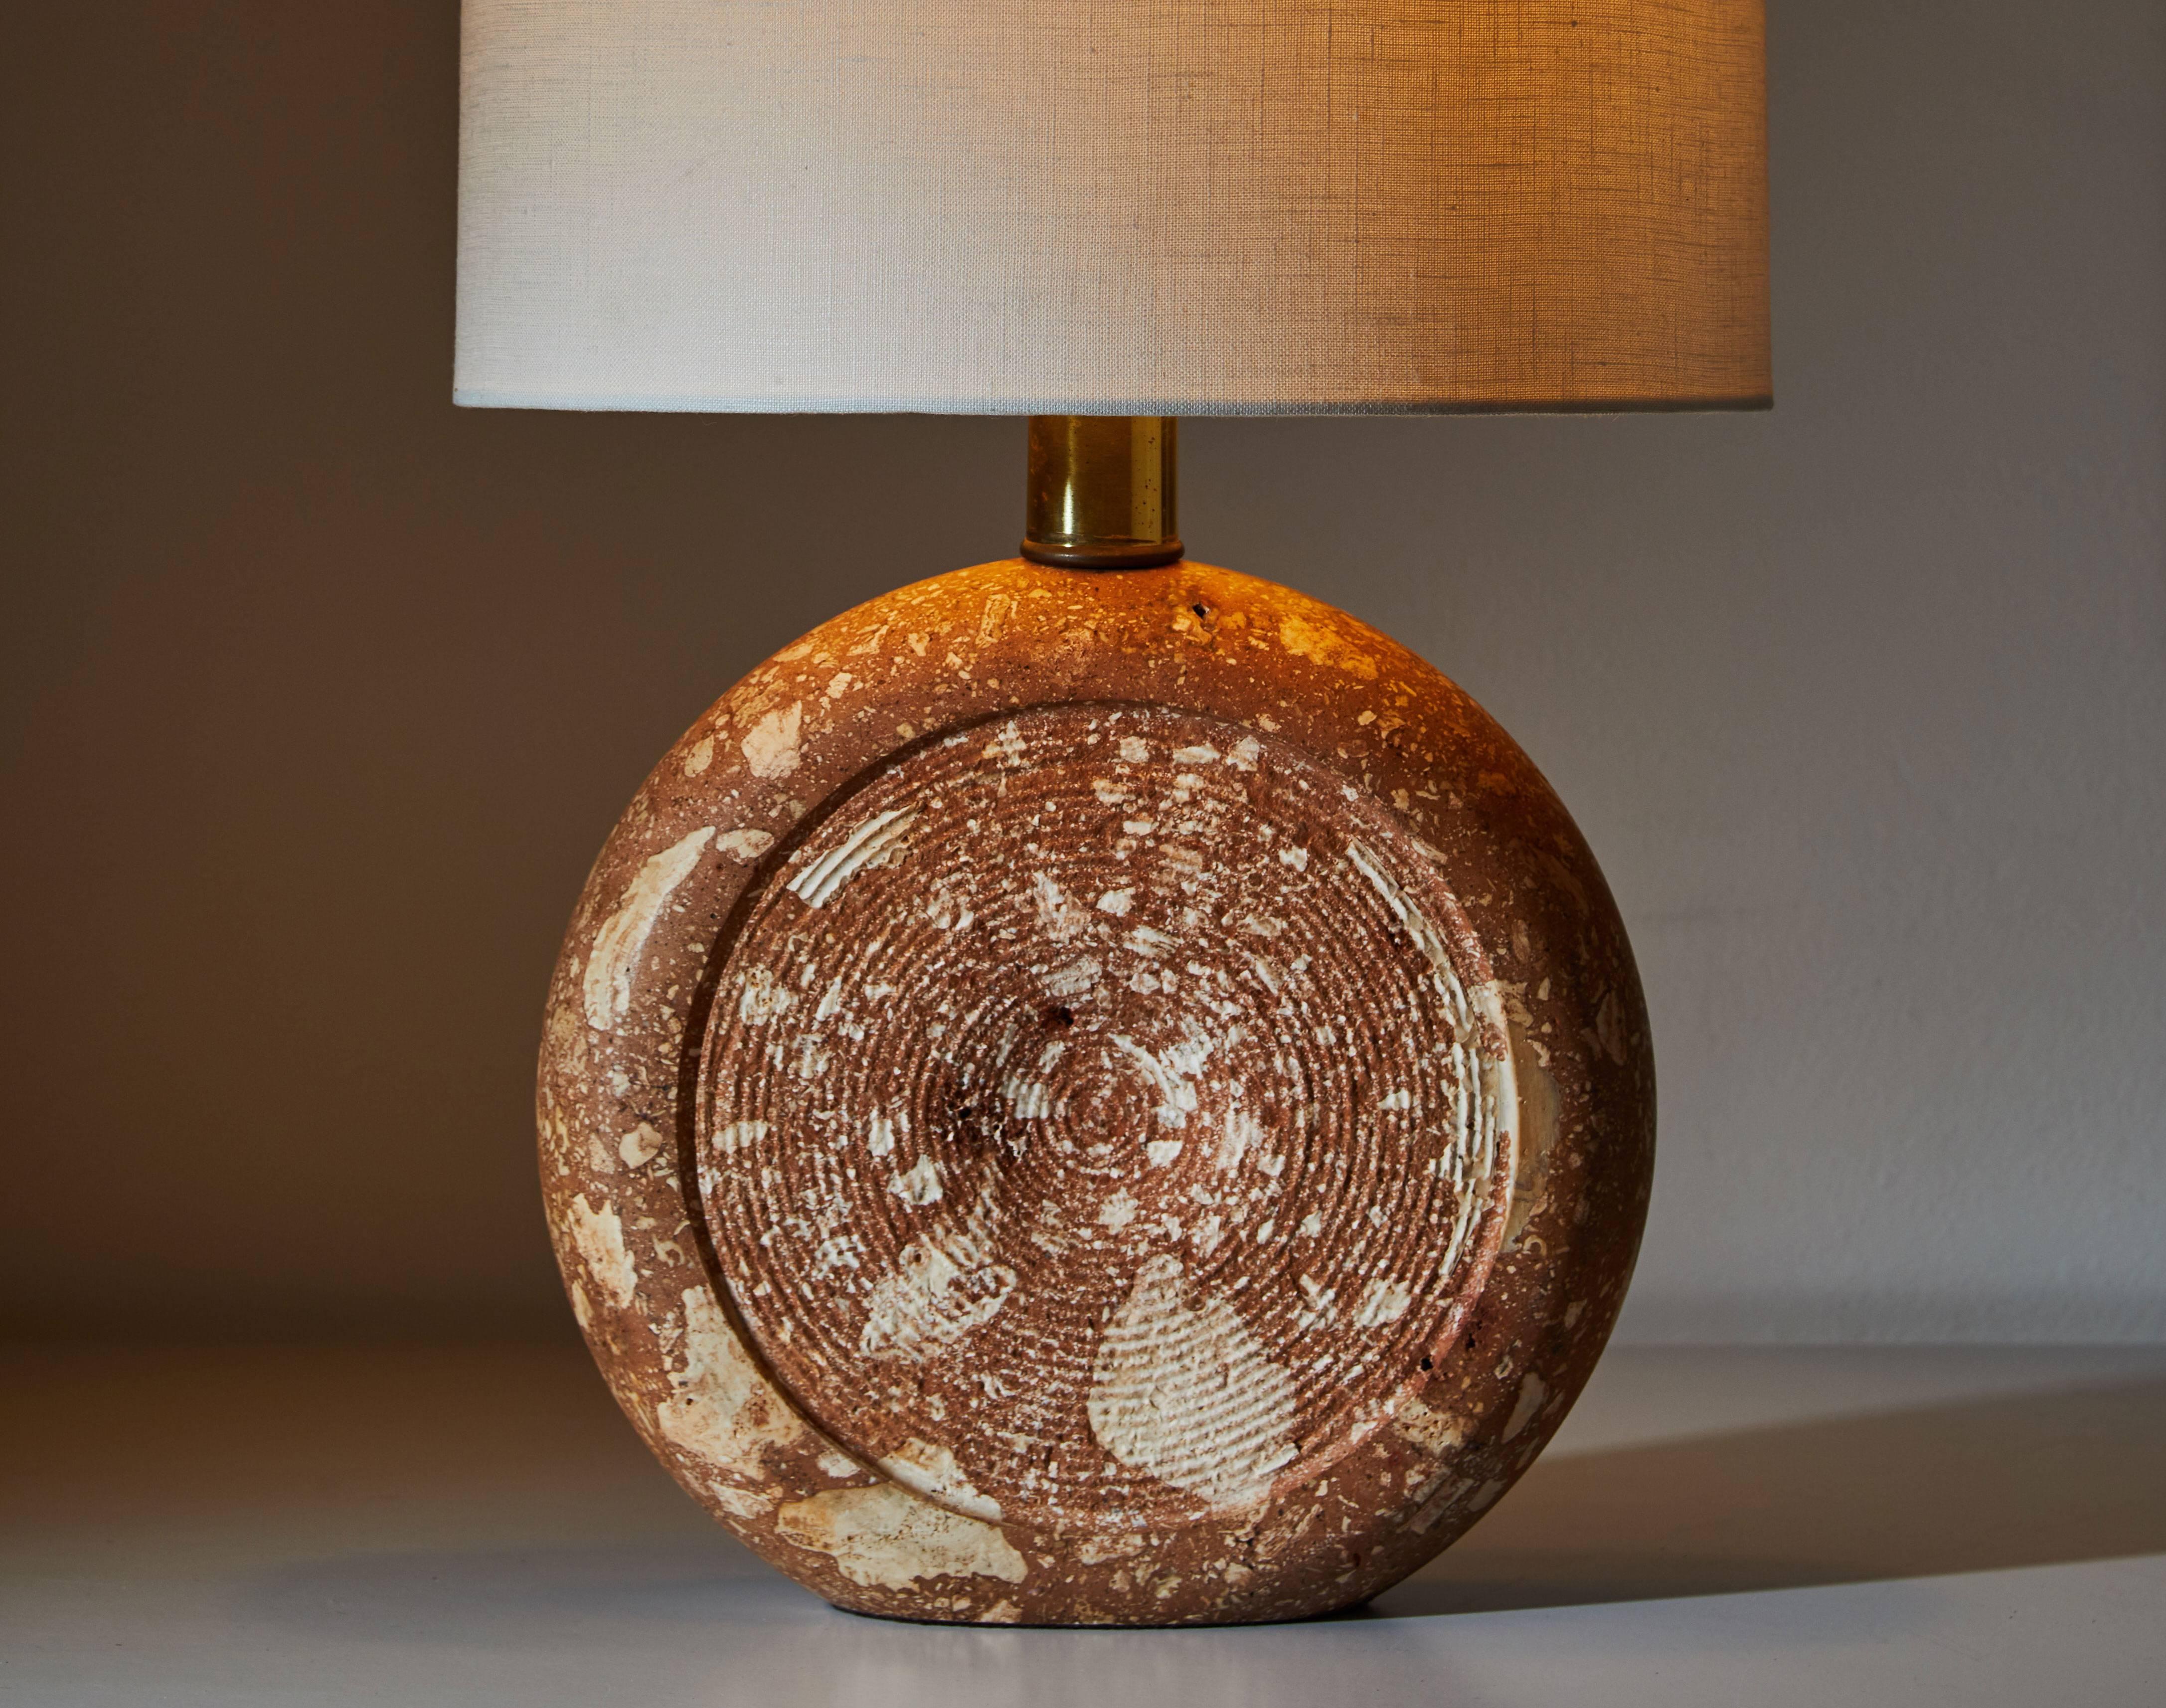 Marble table lamp by Fratelli Manelli designed in Italy, circa 1970s. Rewired with brown French twist silk cord. Takes one E26 100w maximum bulb. Does not include shade. Custom shade fabrication available.